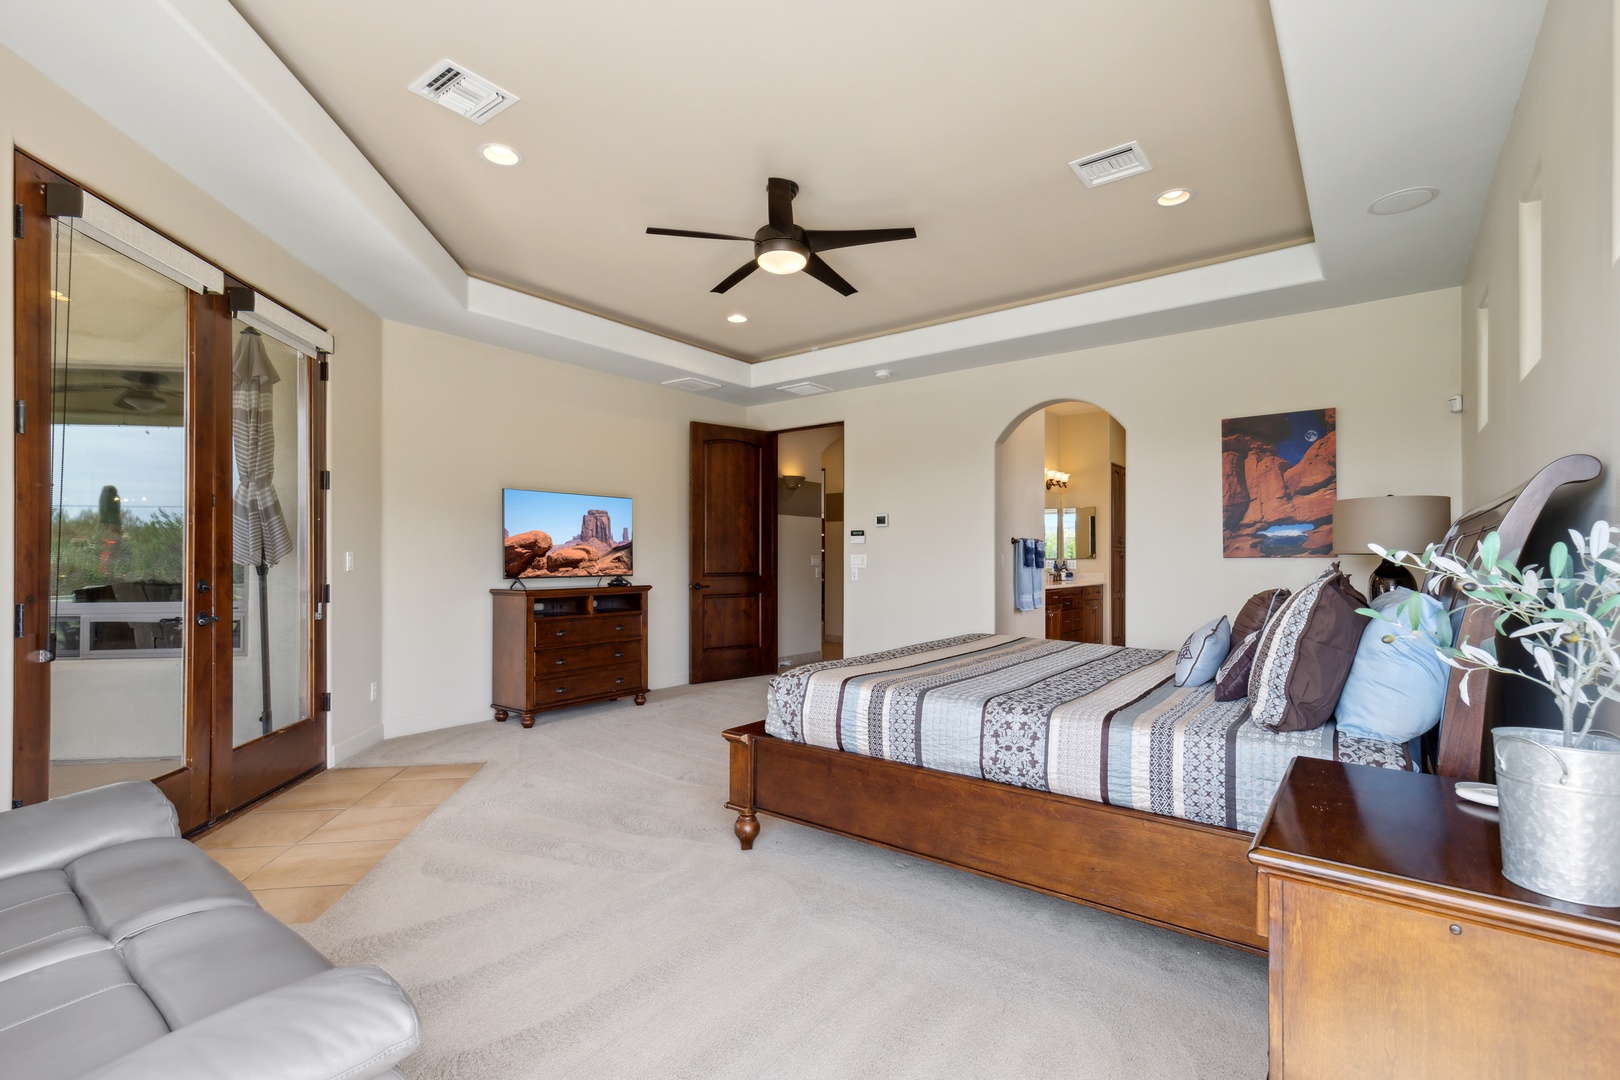 This king suite boasts a stunning view, private ensuite, & patio access